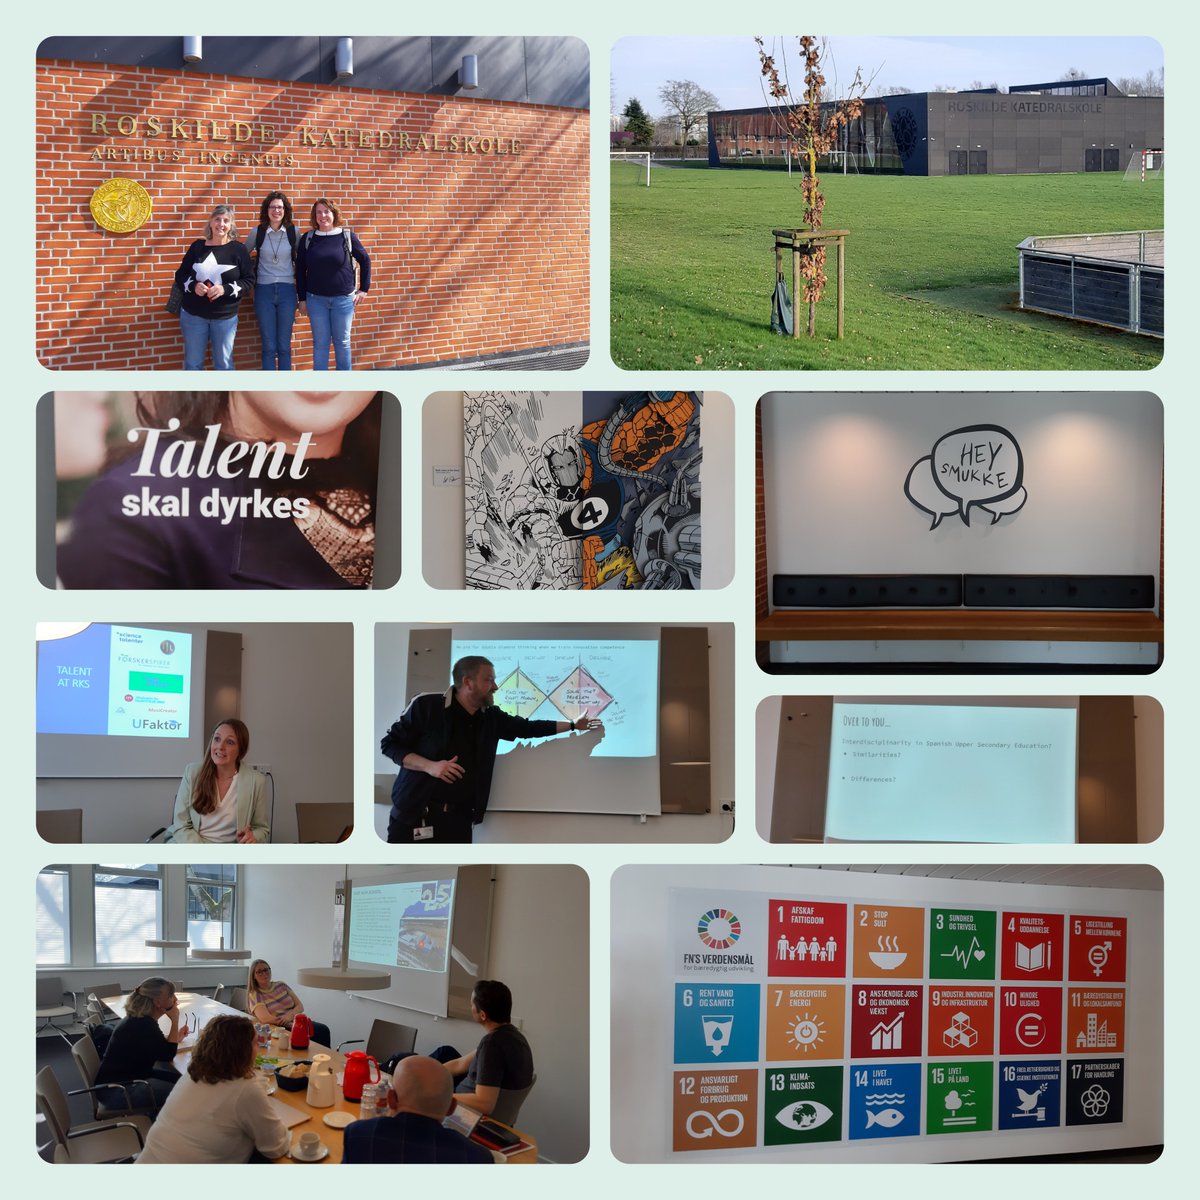 First day at #RoskildeKatedralSkole 🇩🇰🇪🇺 Comparing & contrasting different educational systems. Learning & sharing about #Inclusion #ClassProjects #HighSchoolManagementPlan #Talentedkids
Thanks for such a warm and interesting welcome! 🤗
@EUErasmusPlus  #Jobshadowing #KA121Celrà